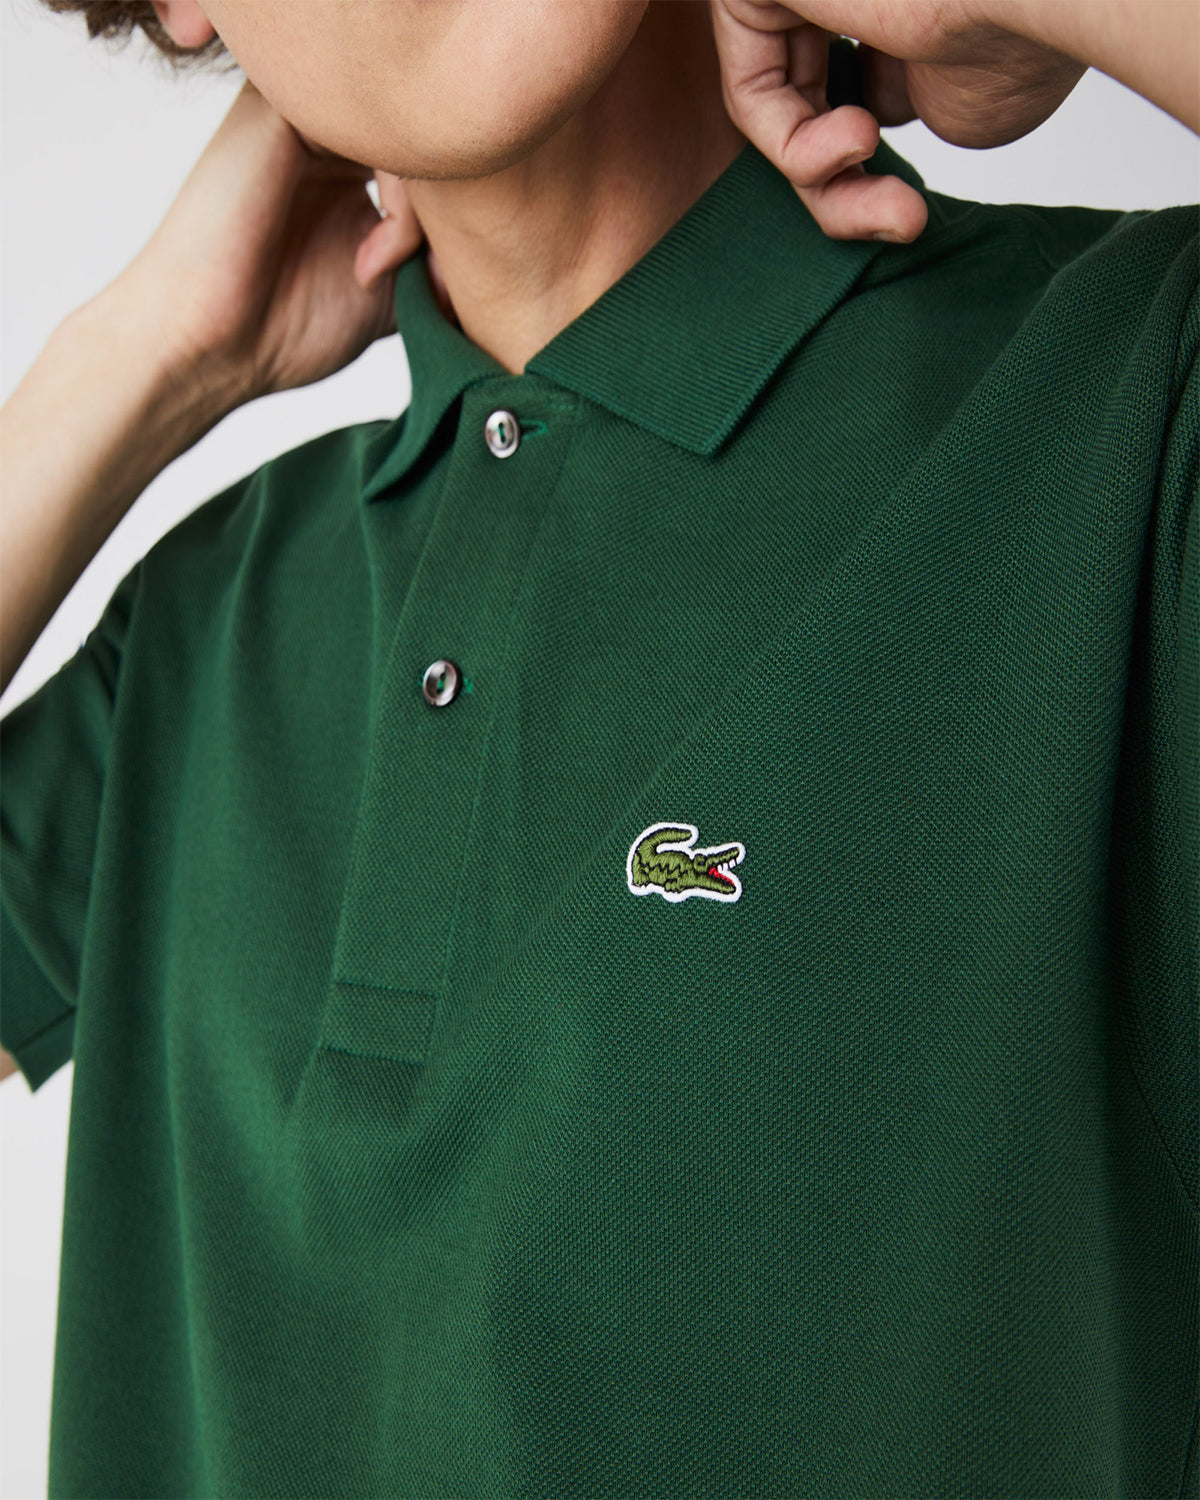 Polo M/m Classic Fit